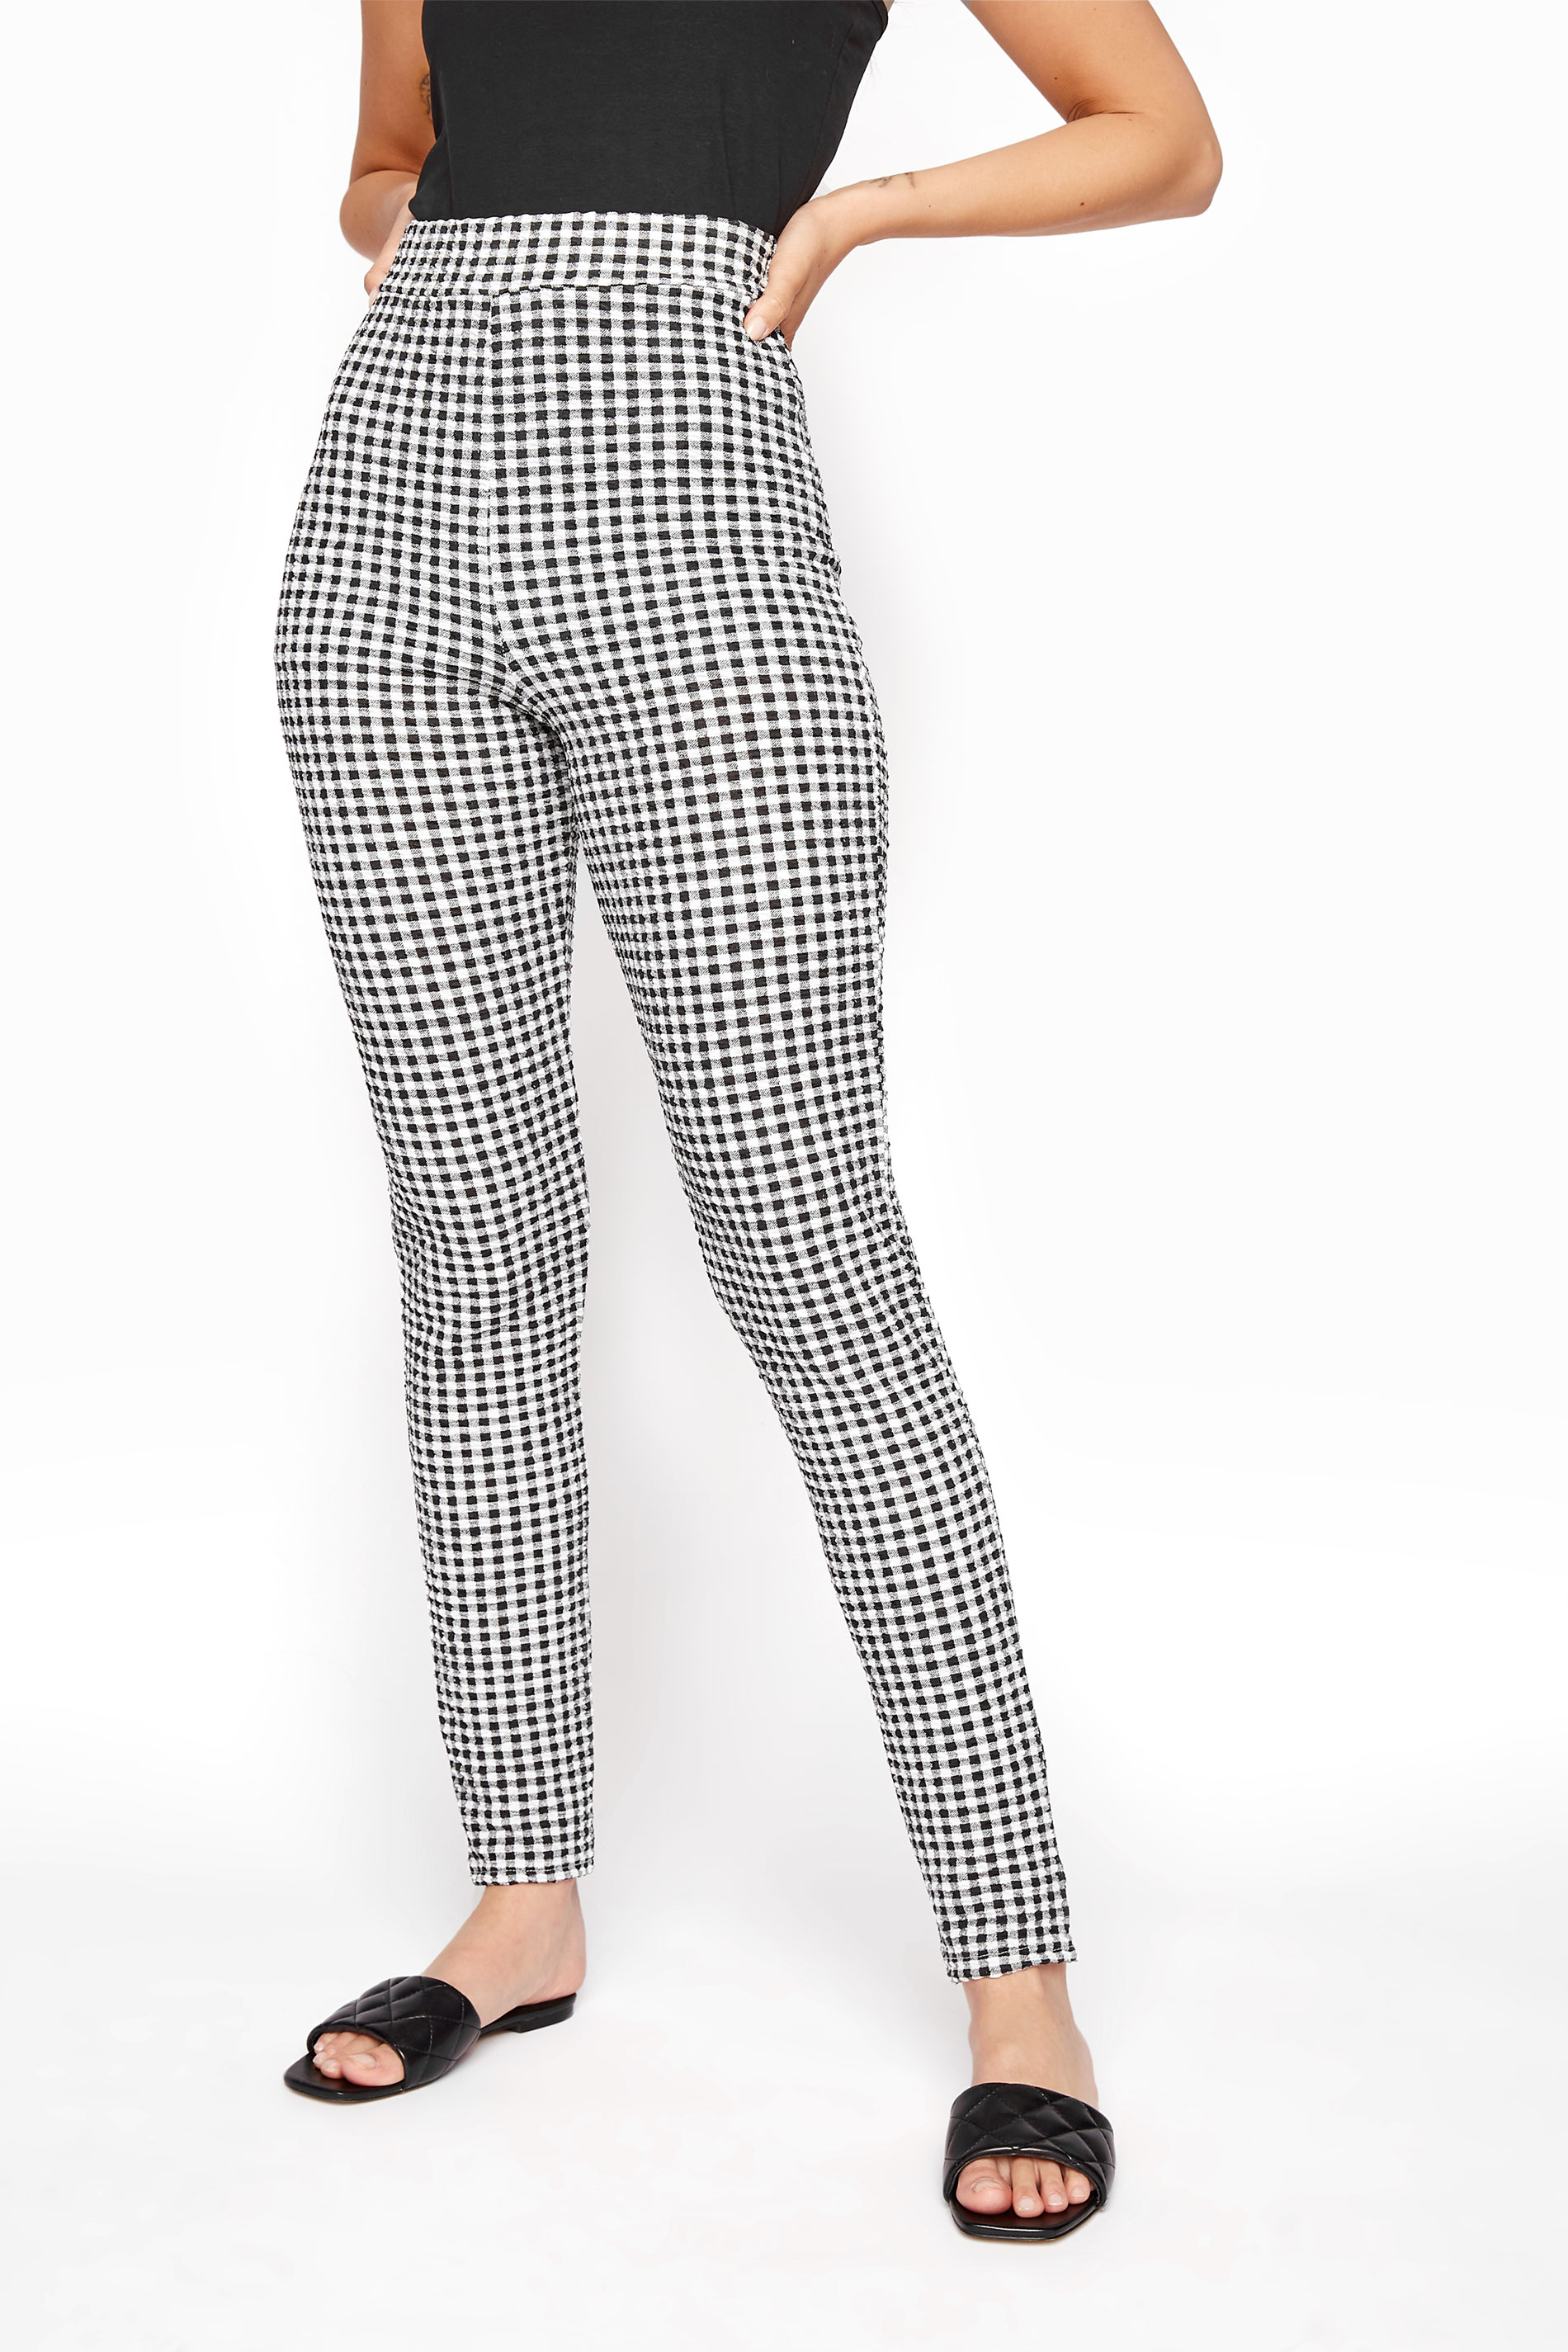 LTS White Textured Gingham Trousers | Long Tall Sally